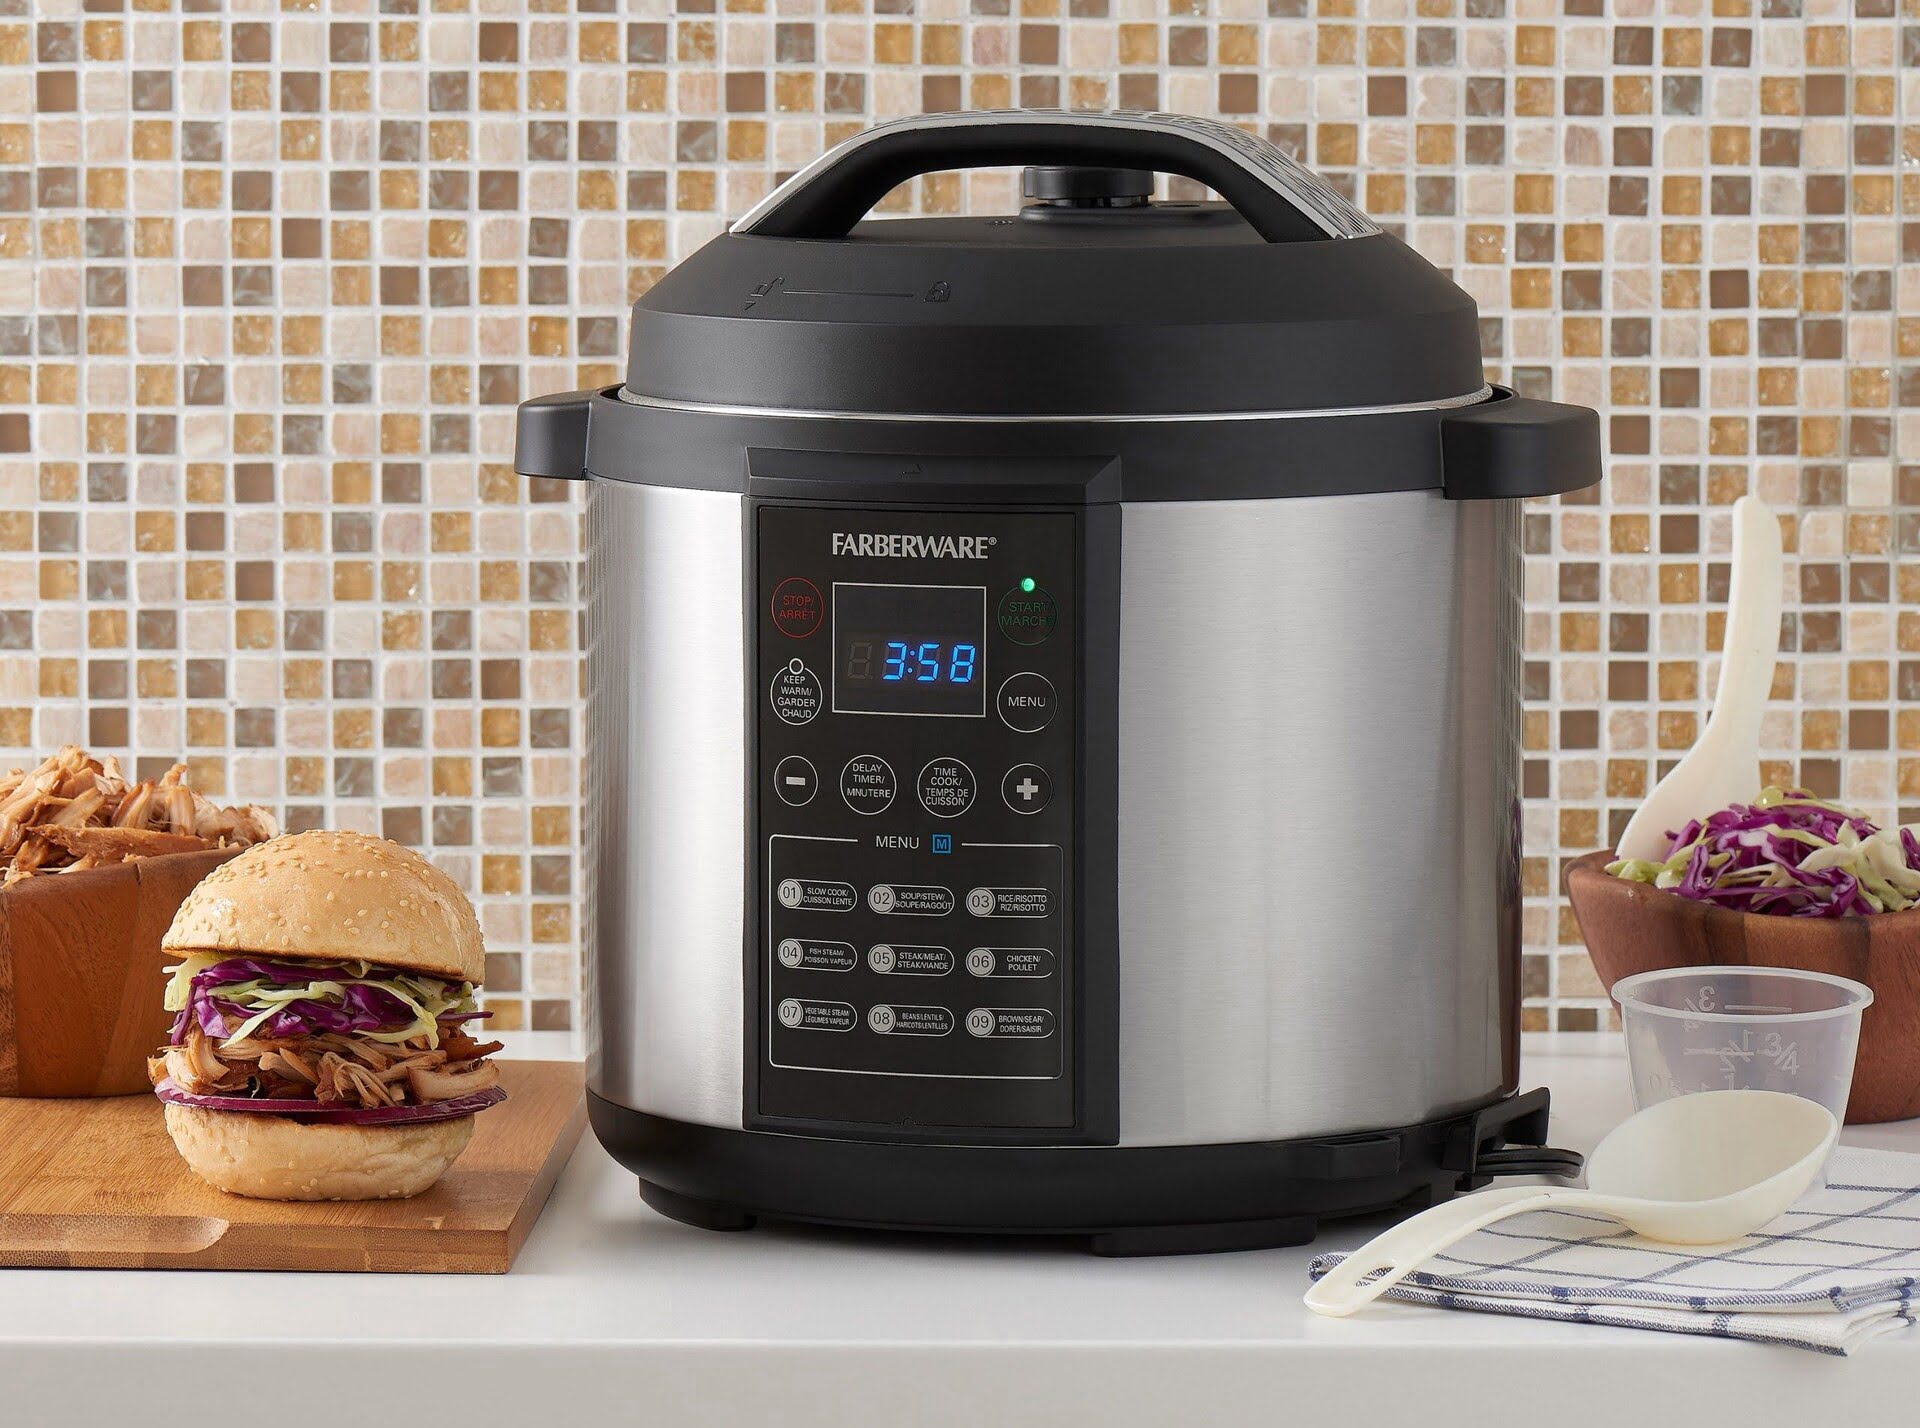 All-In-One Versatility Makes NESCO Smart Canner & Cooker the